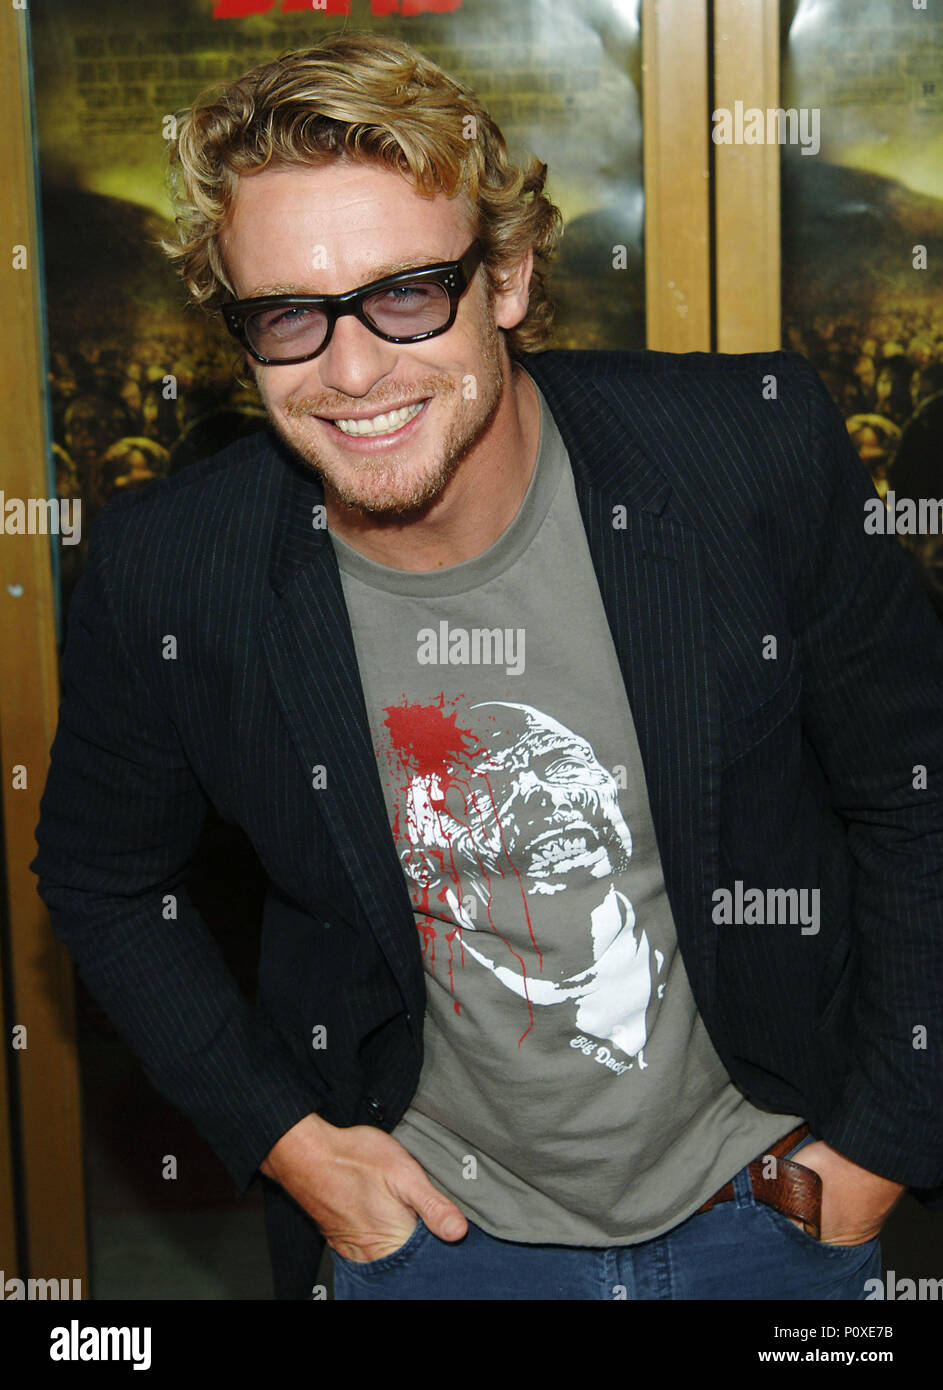 Simon Baker arriving at the Land of The Dead Premiere at the National Theatre in Los Angeles. June, 20. 2005.01 BakerSimon 032 Red Carpet Event, Vertical, USA, Film Industry, Celebrities,  Photography, Bestof, Arts Culture and Entertainment, Topix Celebrities fashion /  Vertical, Best of, Event in Hollywood Life - California,  Red Carpet and backstage, USA, Film Industry, Celebrities,  movie celebrities, TV celebrities, Music celebrities, Photography, Bestof, Arts Culture and Entertainment,  Topix, vertical, one person,, from the years , 2003 to 2005, inquiry tsuni@Gamma-USA.com - Three Quarte Stock Photo